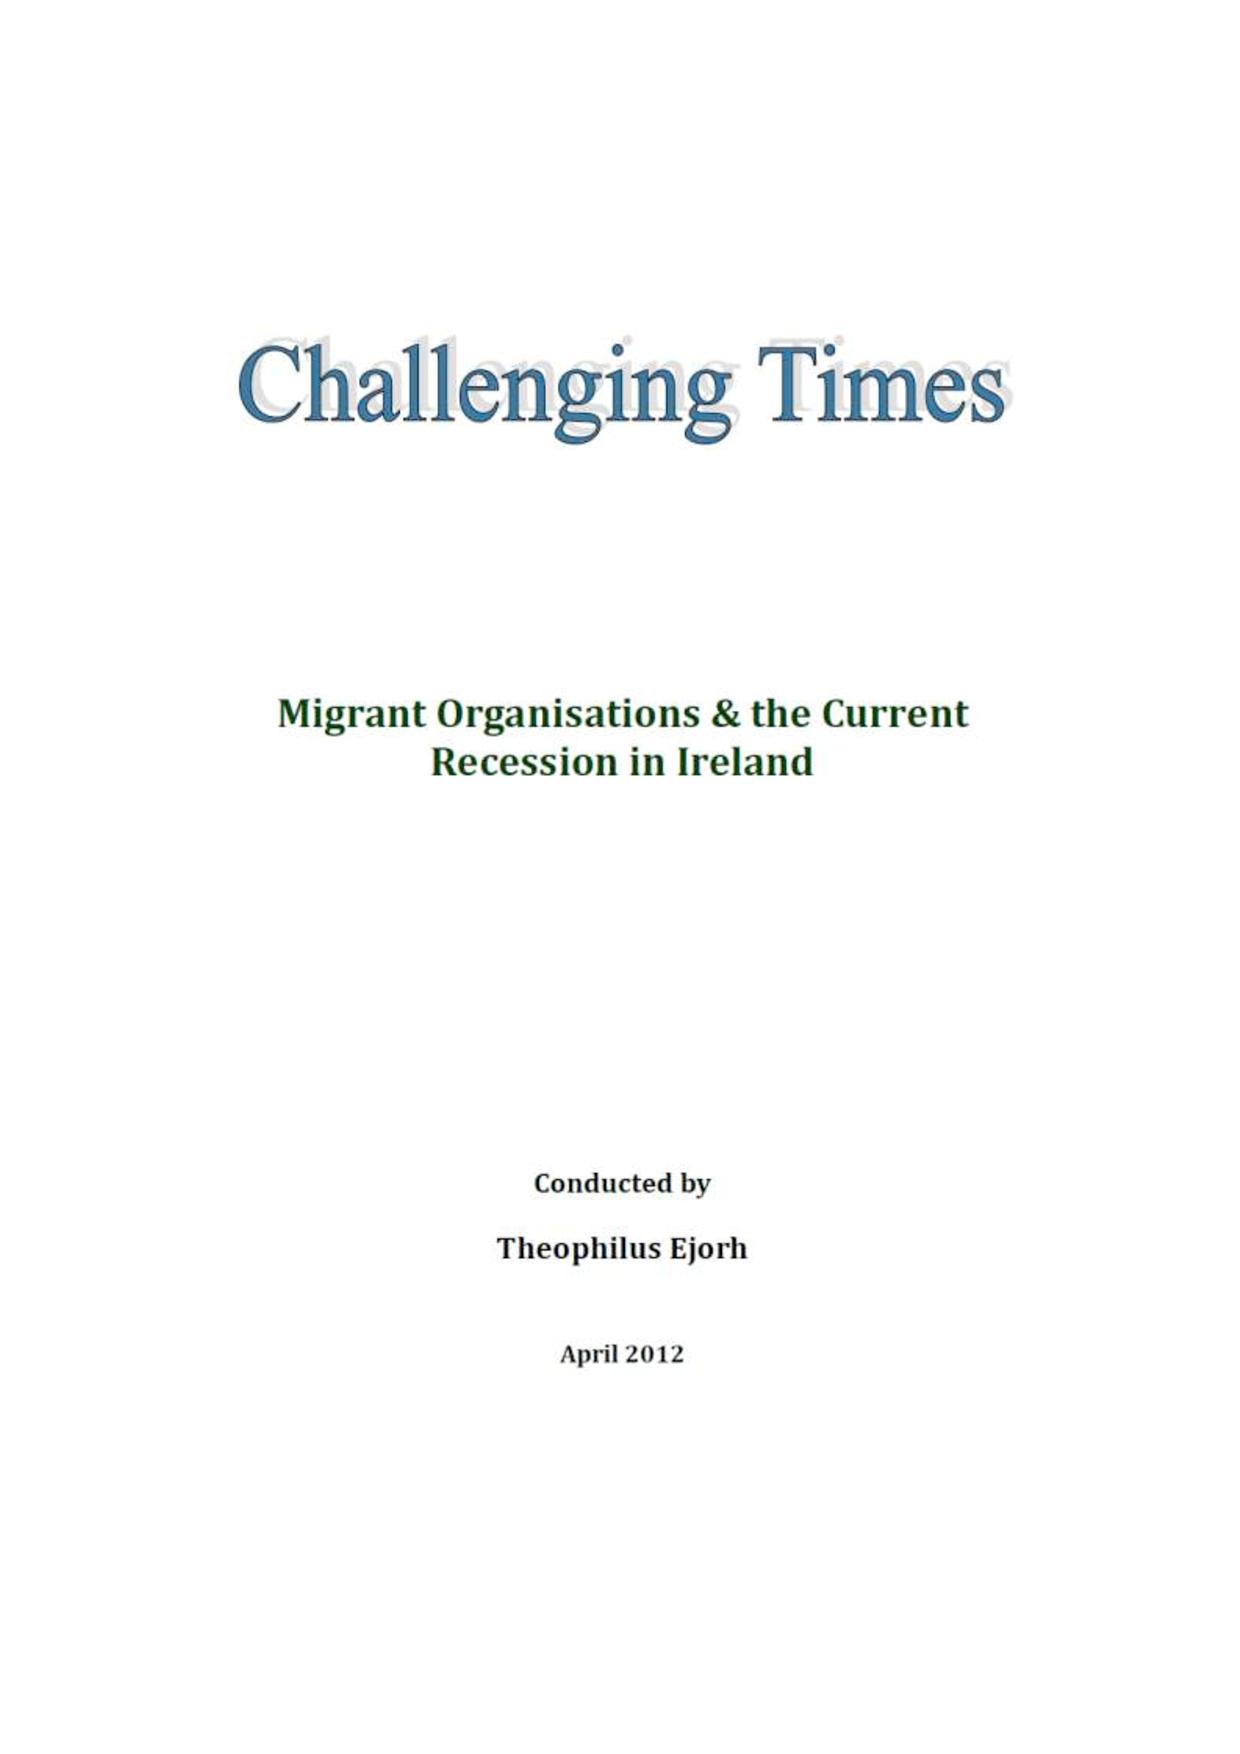 Publication cover - CHALLENGING TIMES - Migrant Organisations & the Current Recession in Ireland (2012)